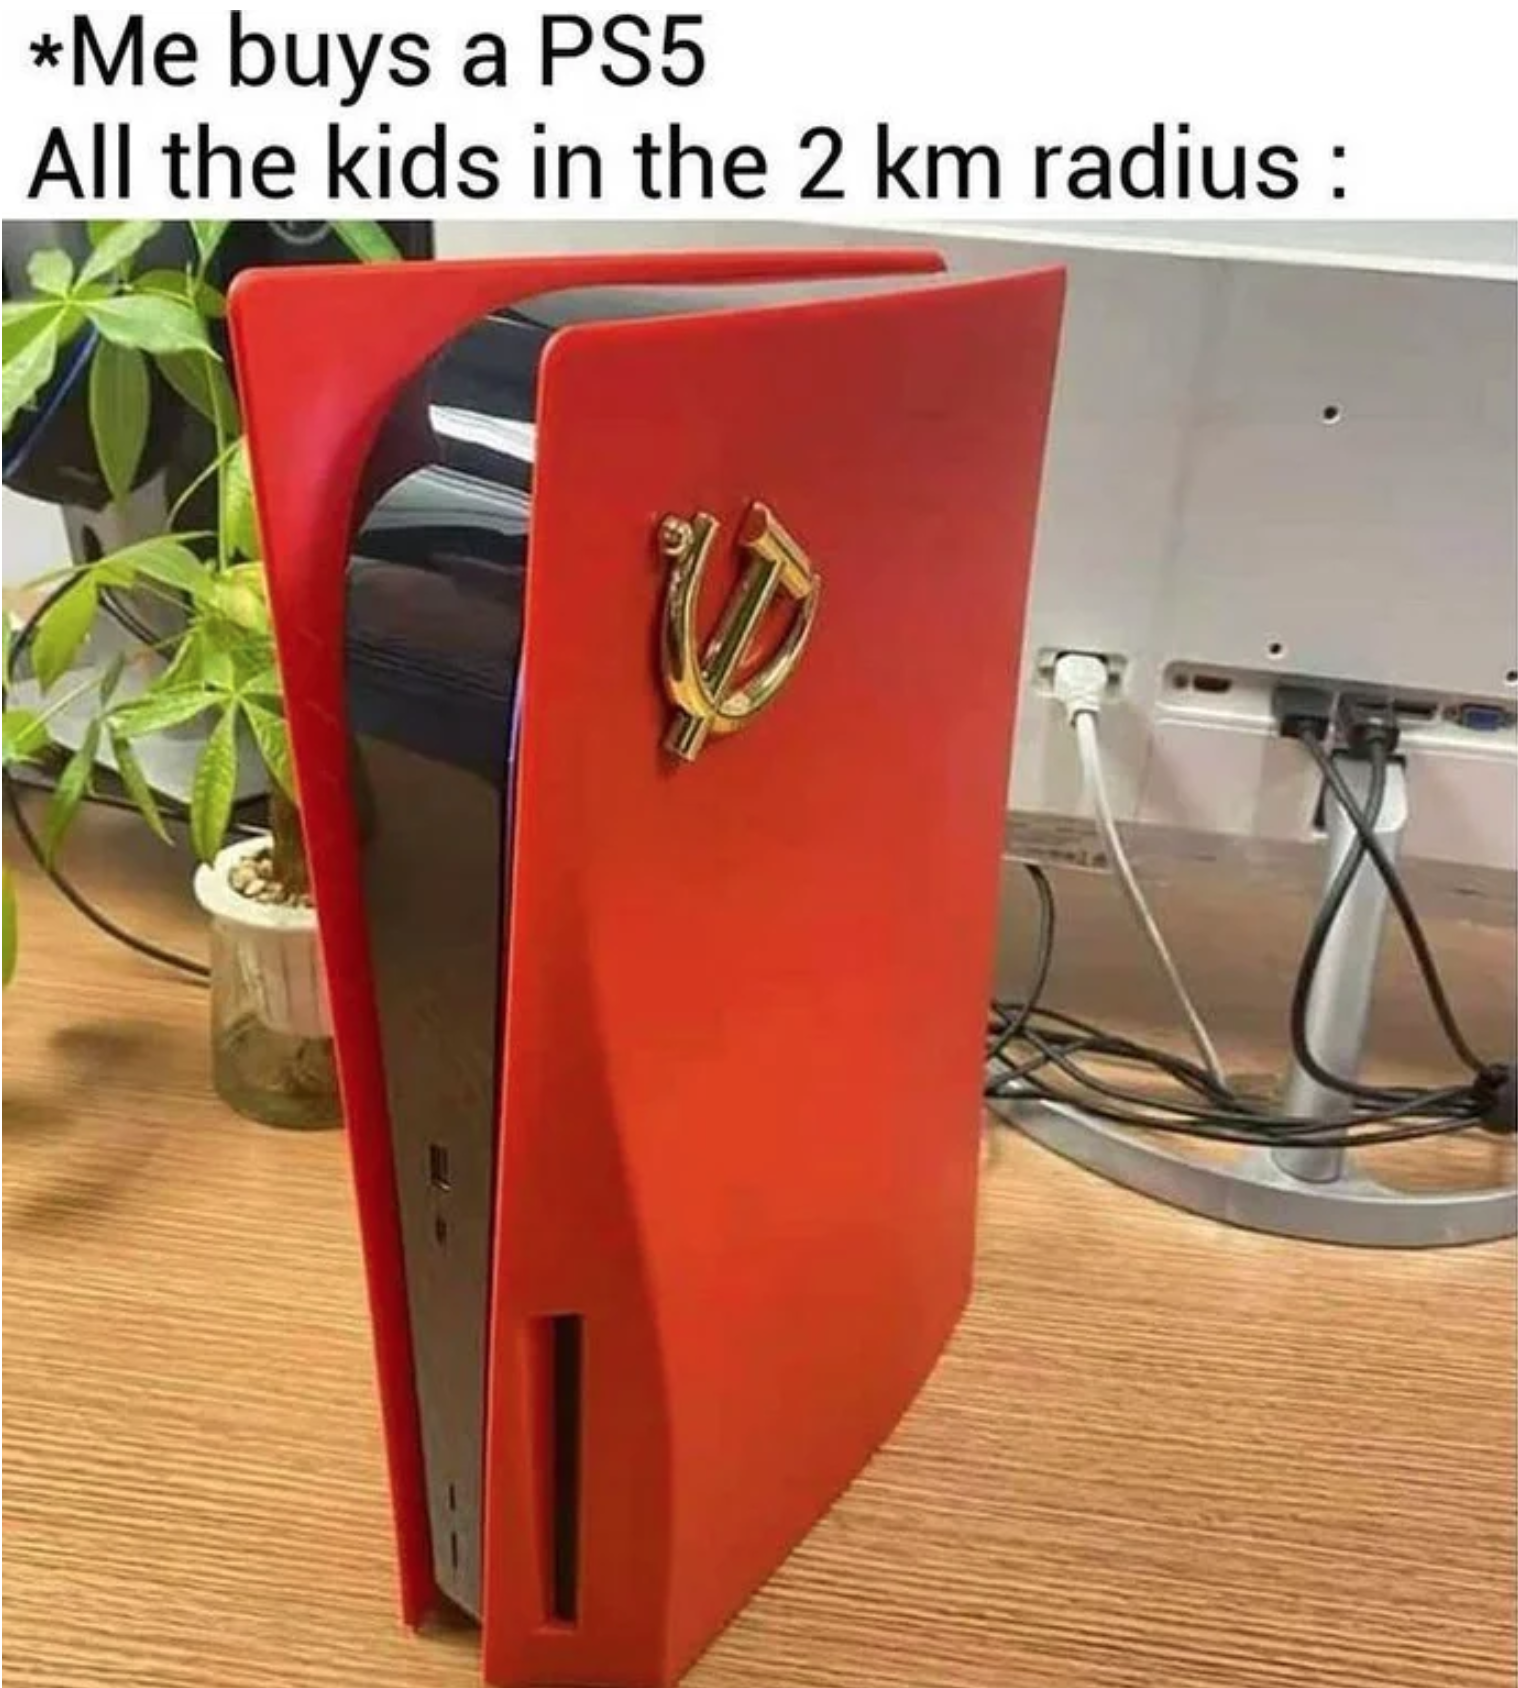 funny gaming memes - PlayStation 5 - Me buys a PS5 All the kids in the 2 km radius